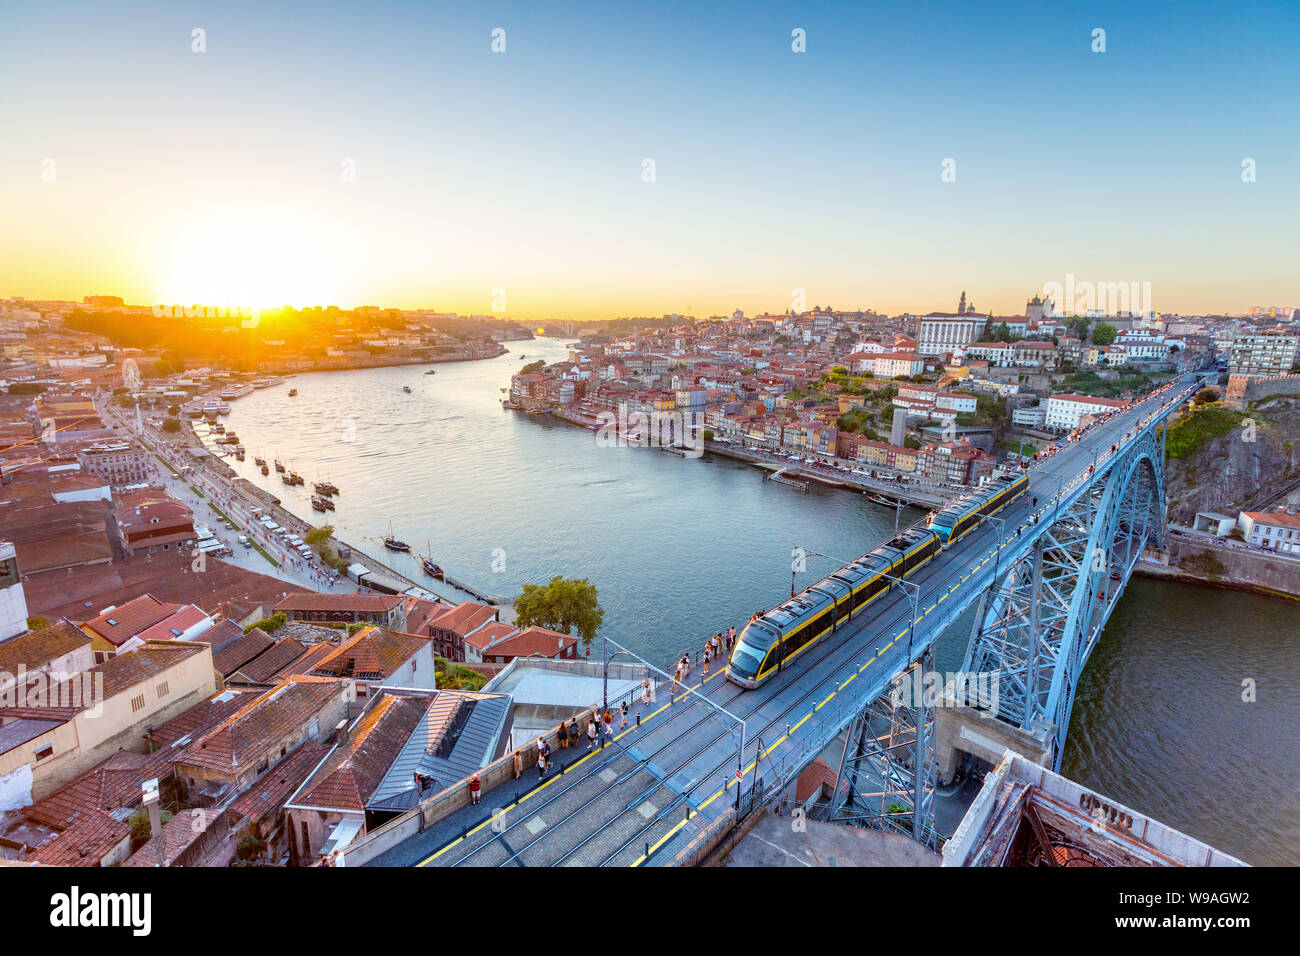 View of the historic city of Porto, Portugal with the Dom Luiz bridge. A metro train can be seen on the bridge Stock Photo